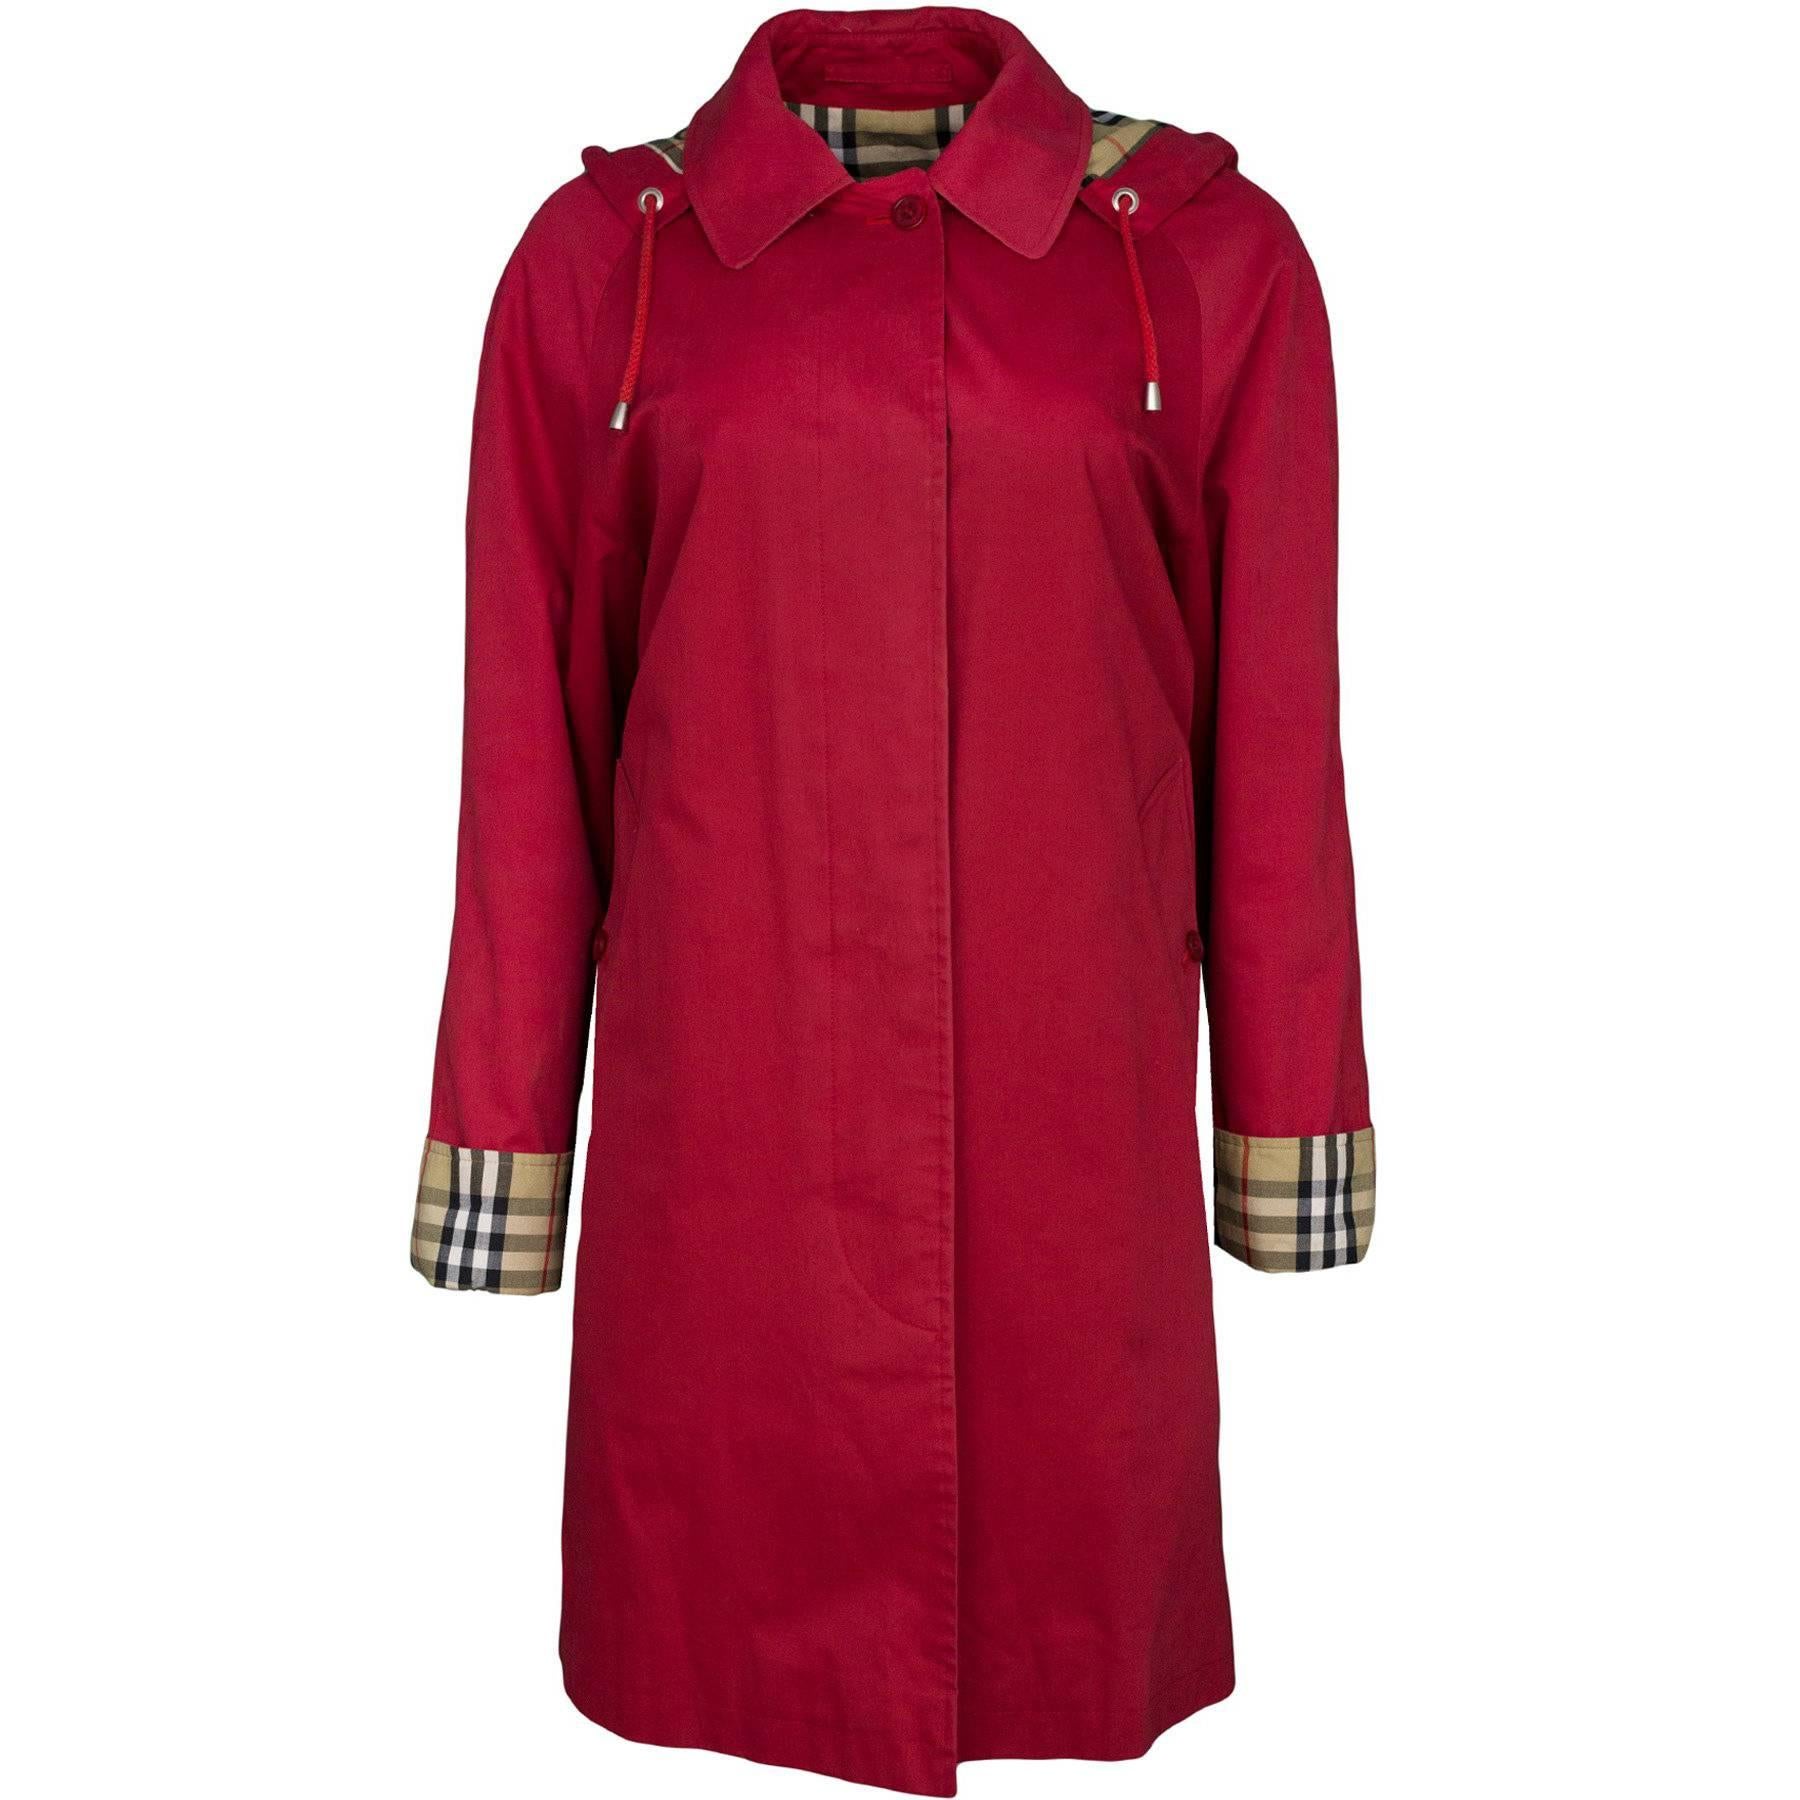 Burberry London Red Cotton Hooded Trench Coat sz S/M